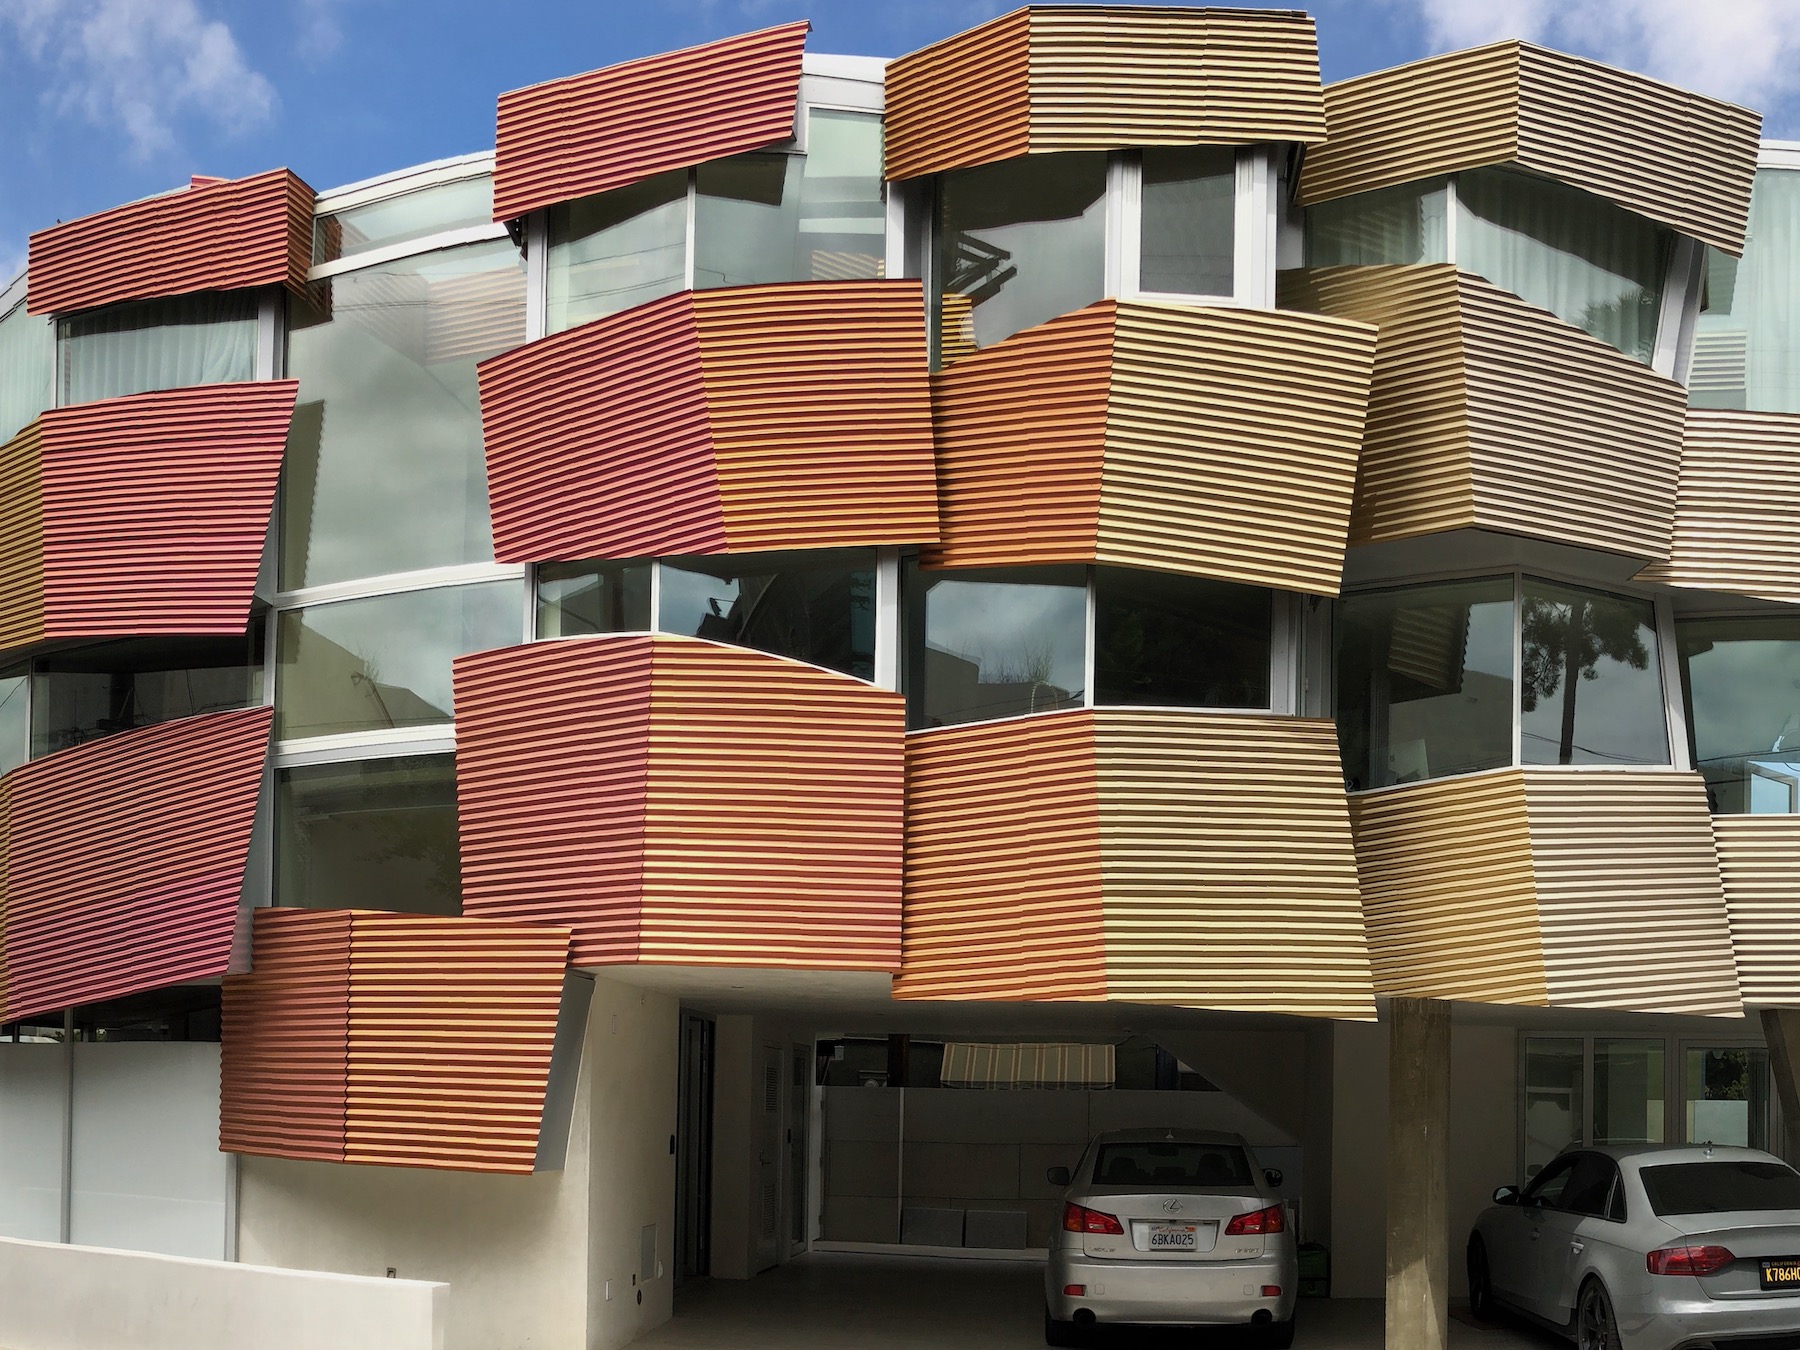 Corrugated Titanium Panels at Different Angles Create a Range of Color Effects with Angle of the Sun